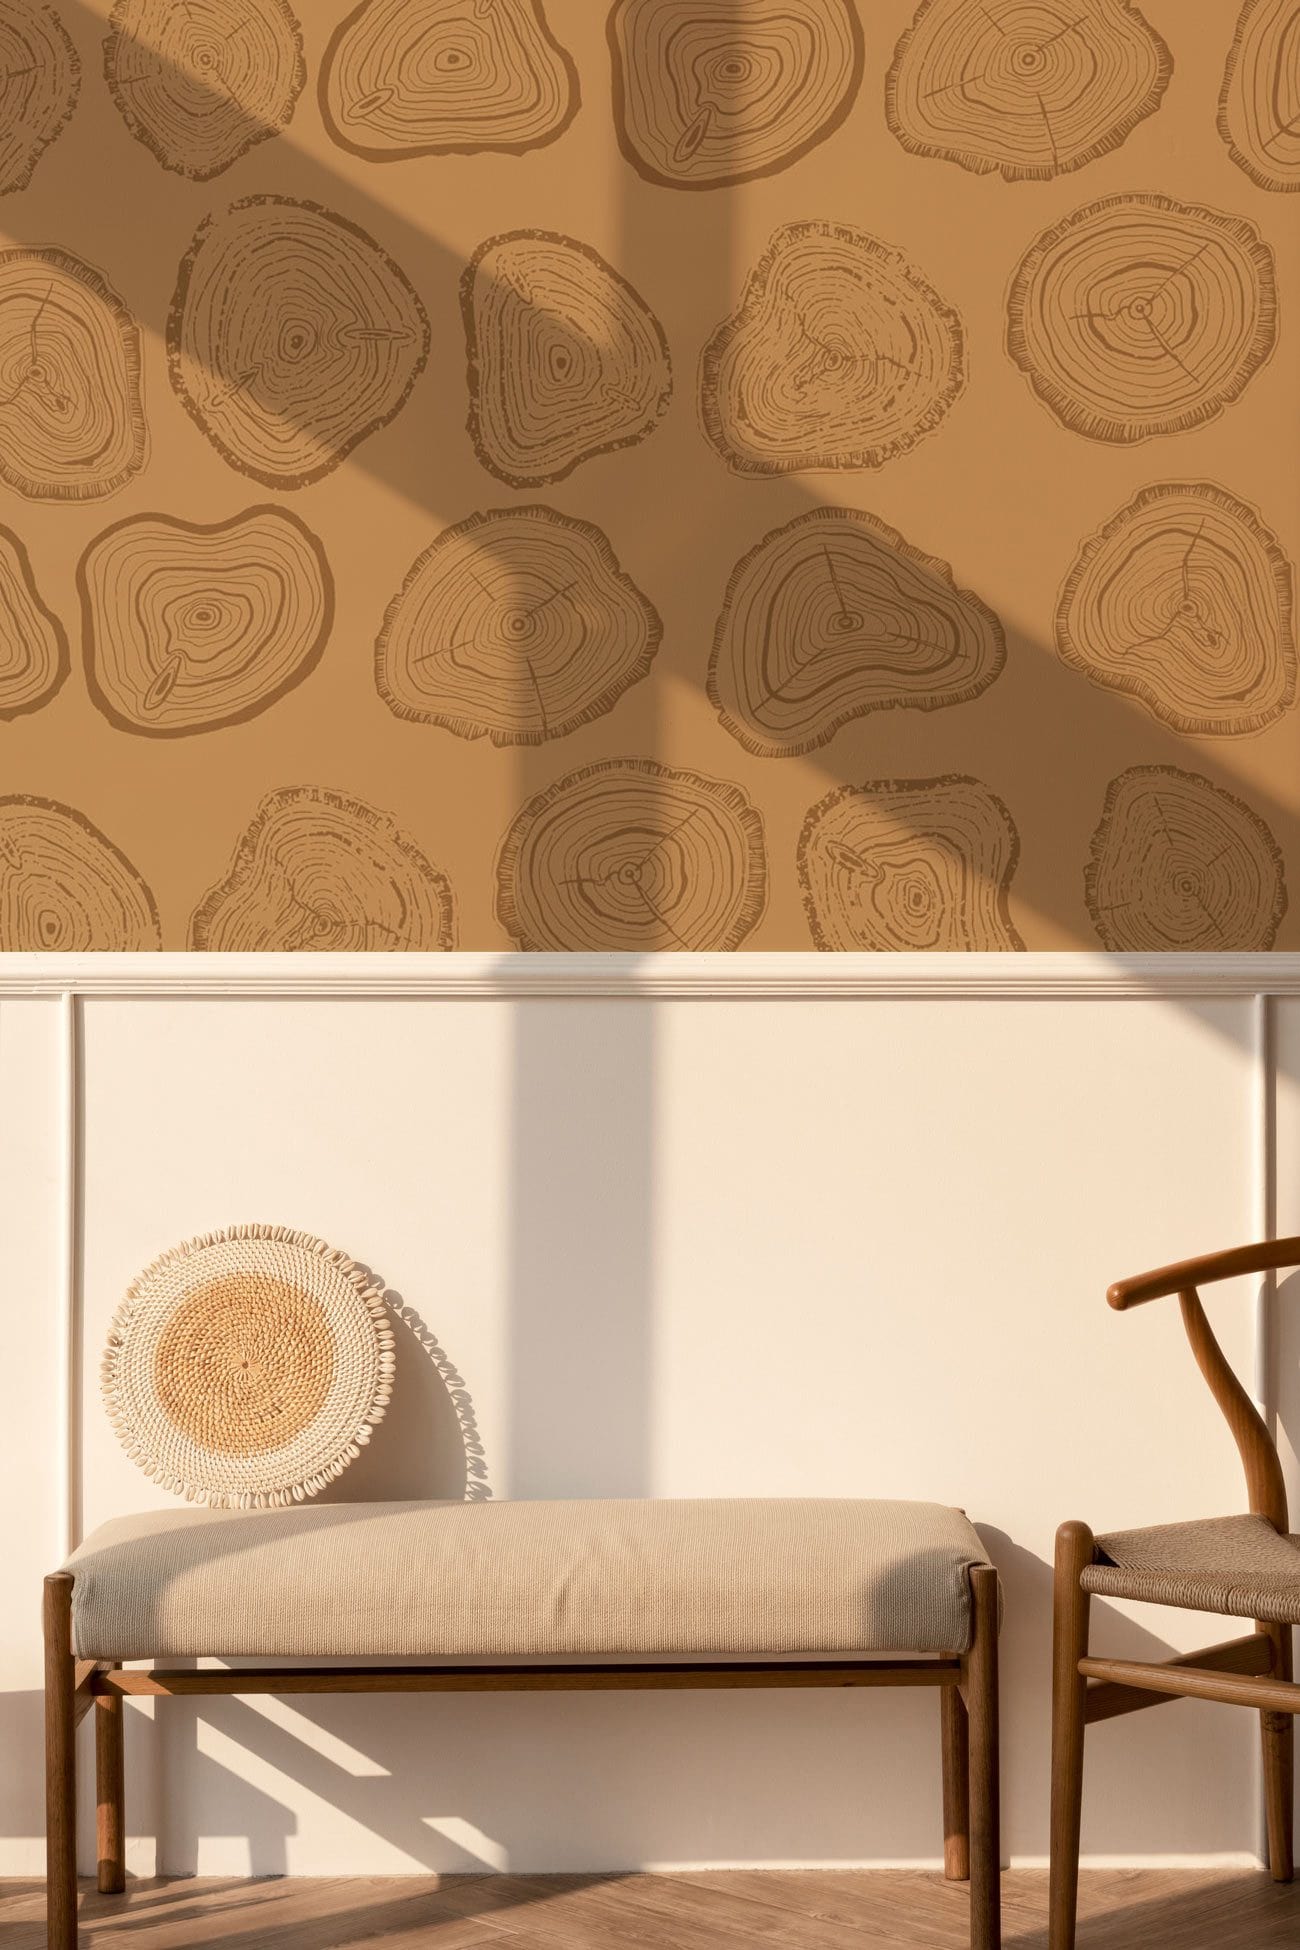 Hallway adorned with a Growth Ring Art Deco Wallpaper Mural